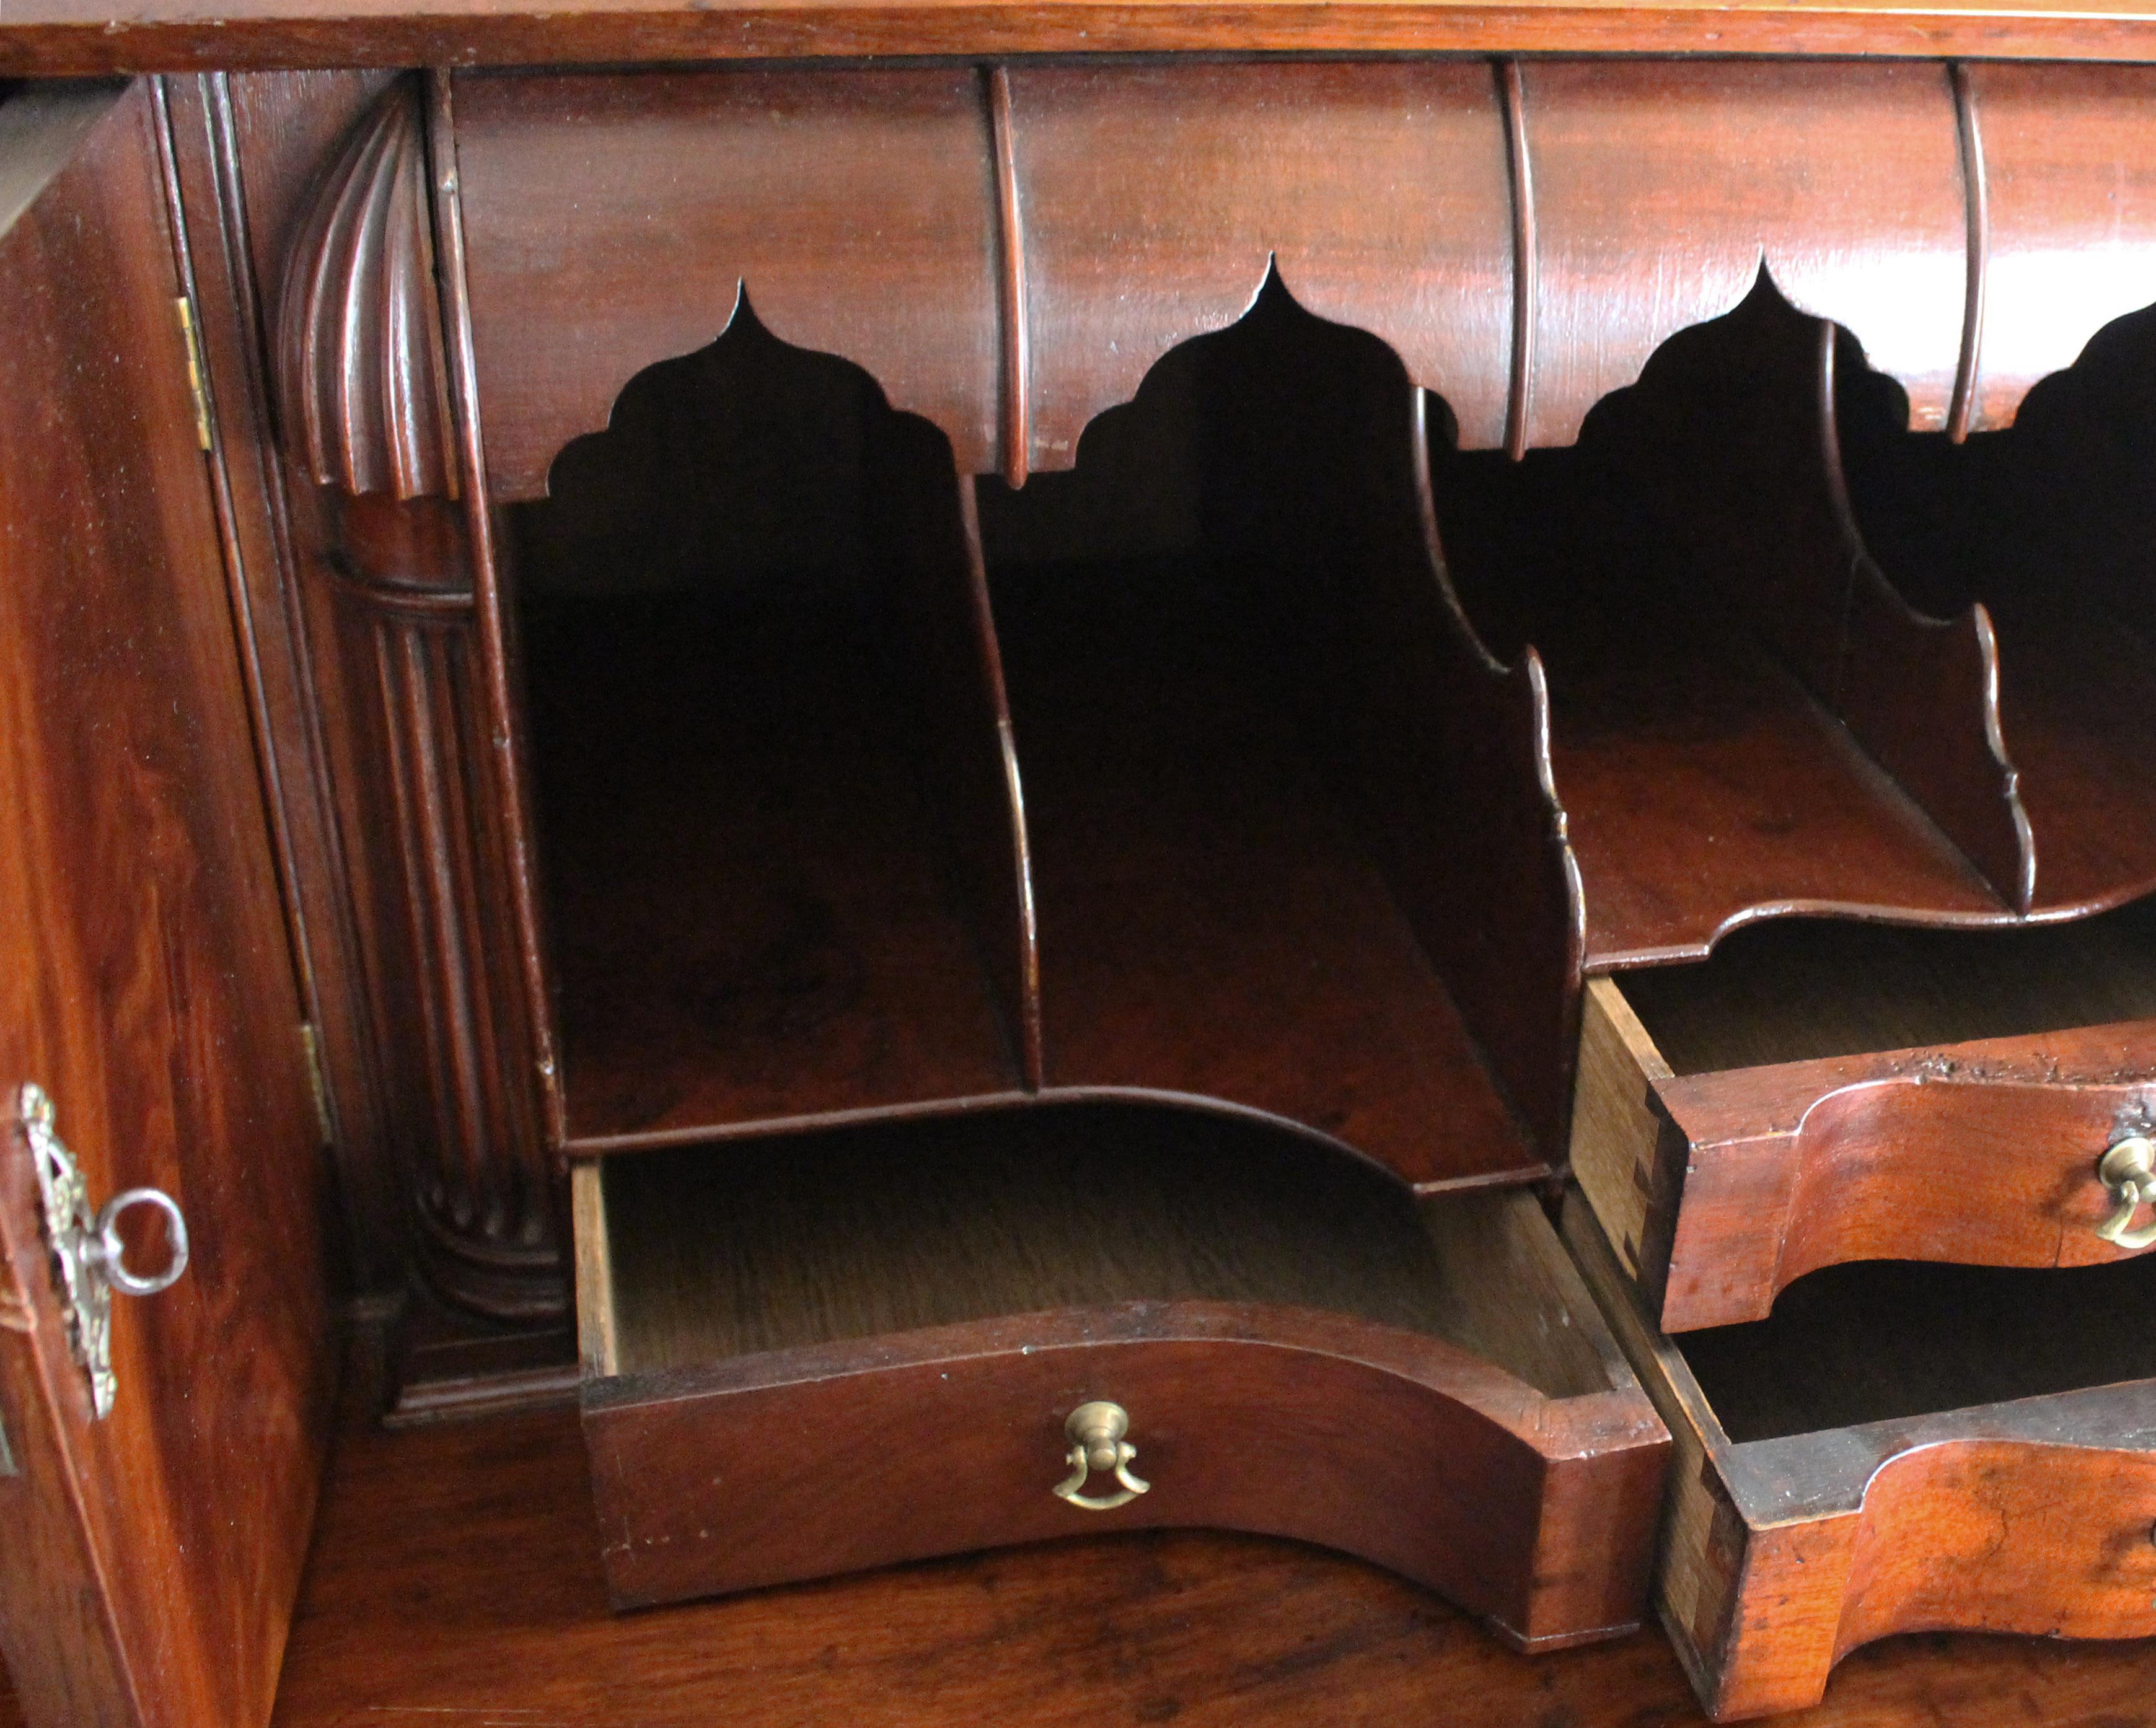 18th Century George III Mahogany Slant Front Bureau with Chippendale Gothic Style Accents